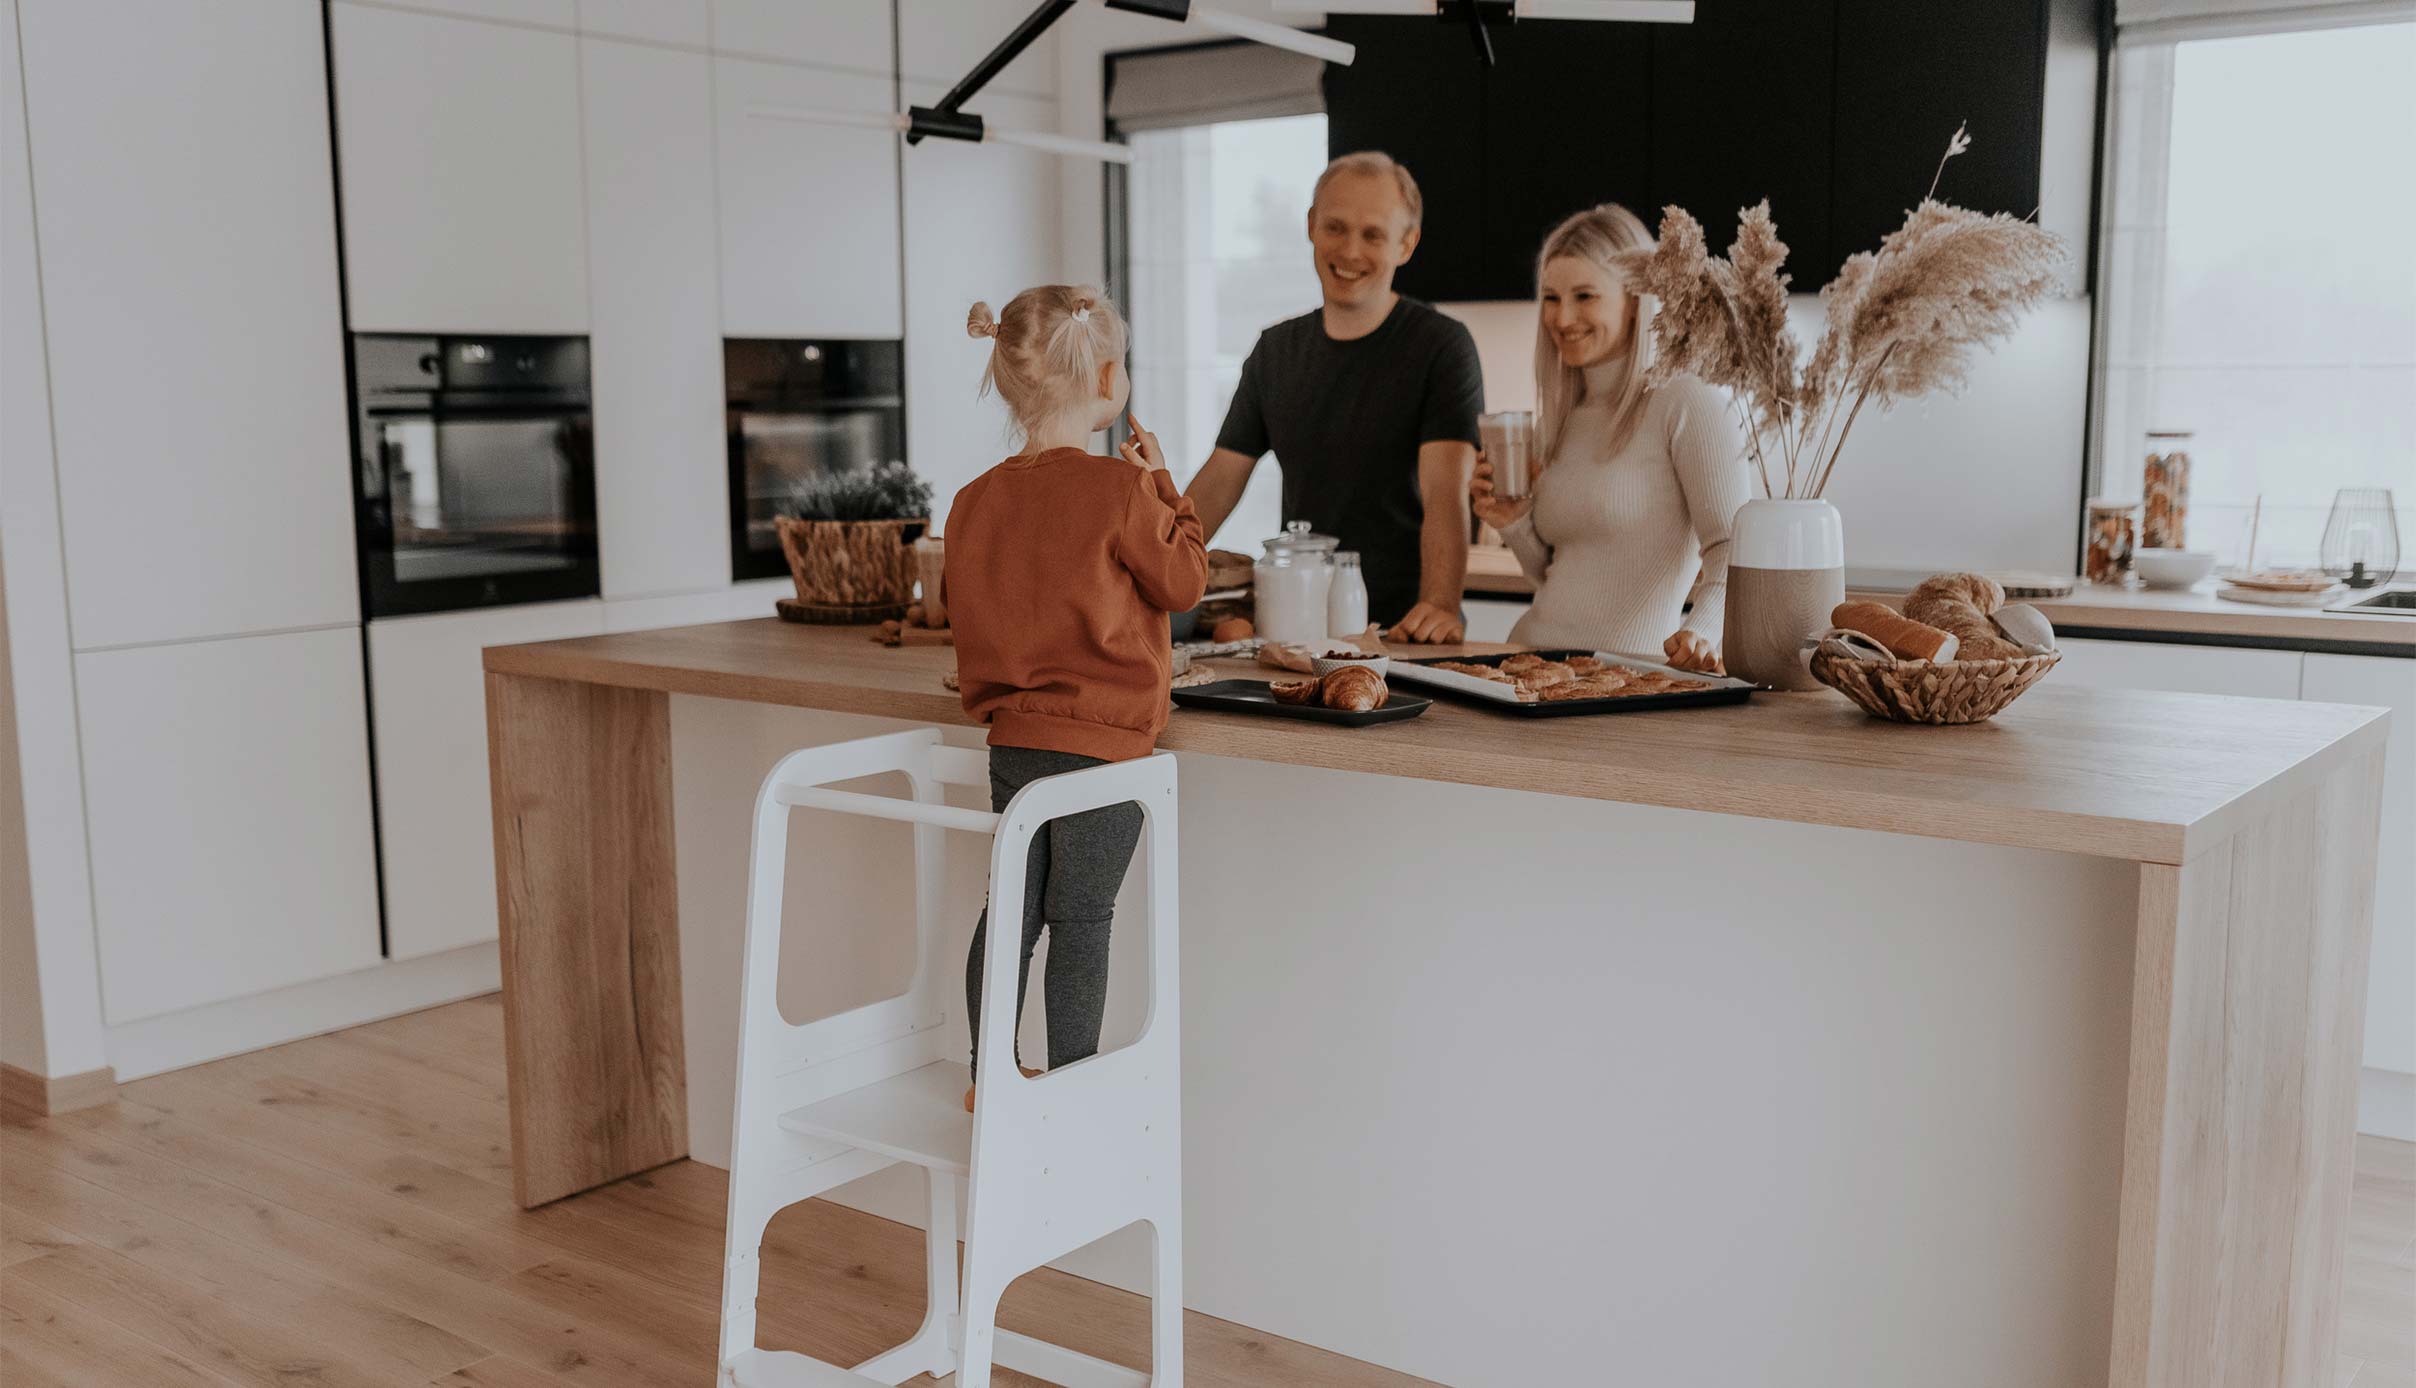 A family in a kitchen with a child on a step stool.